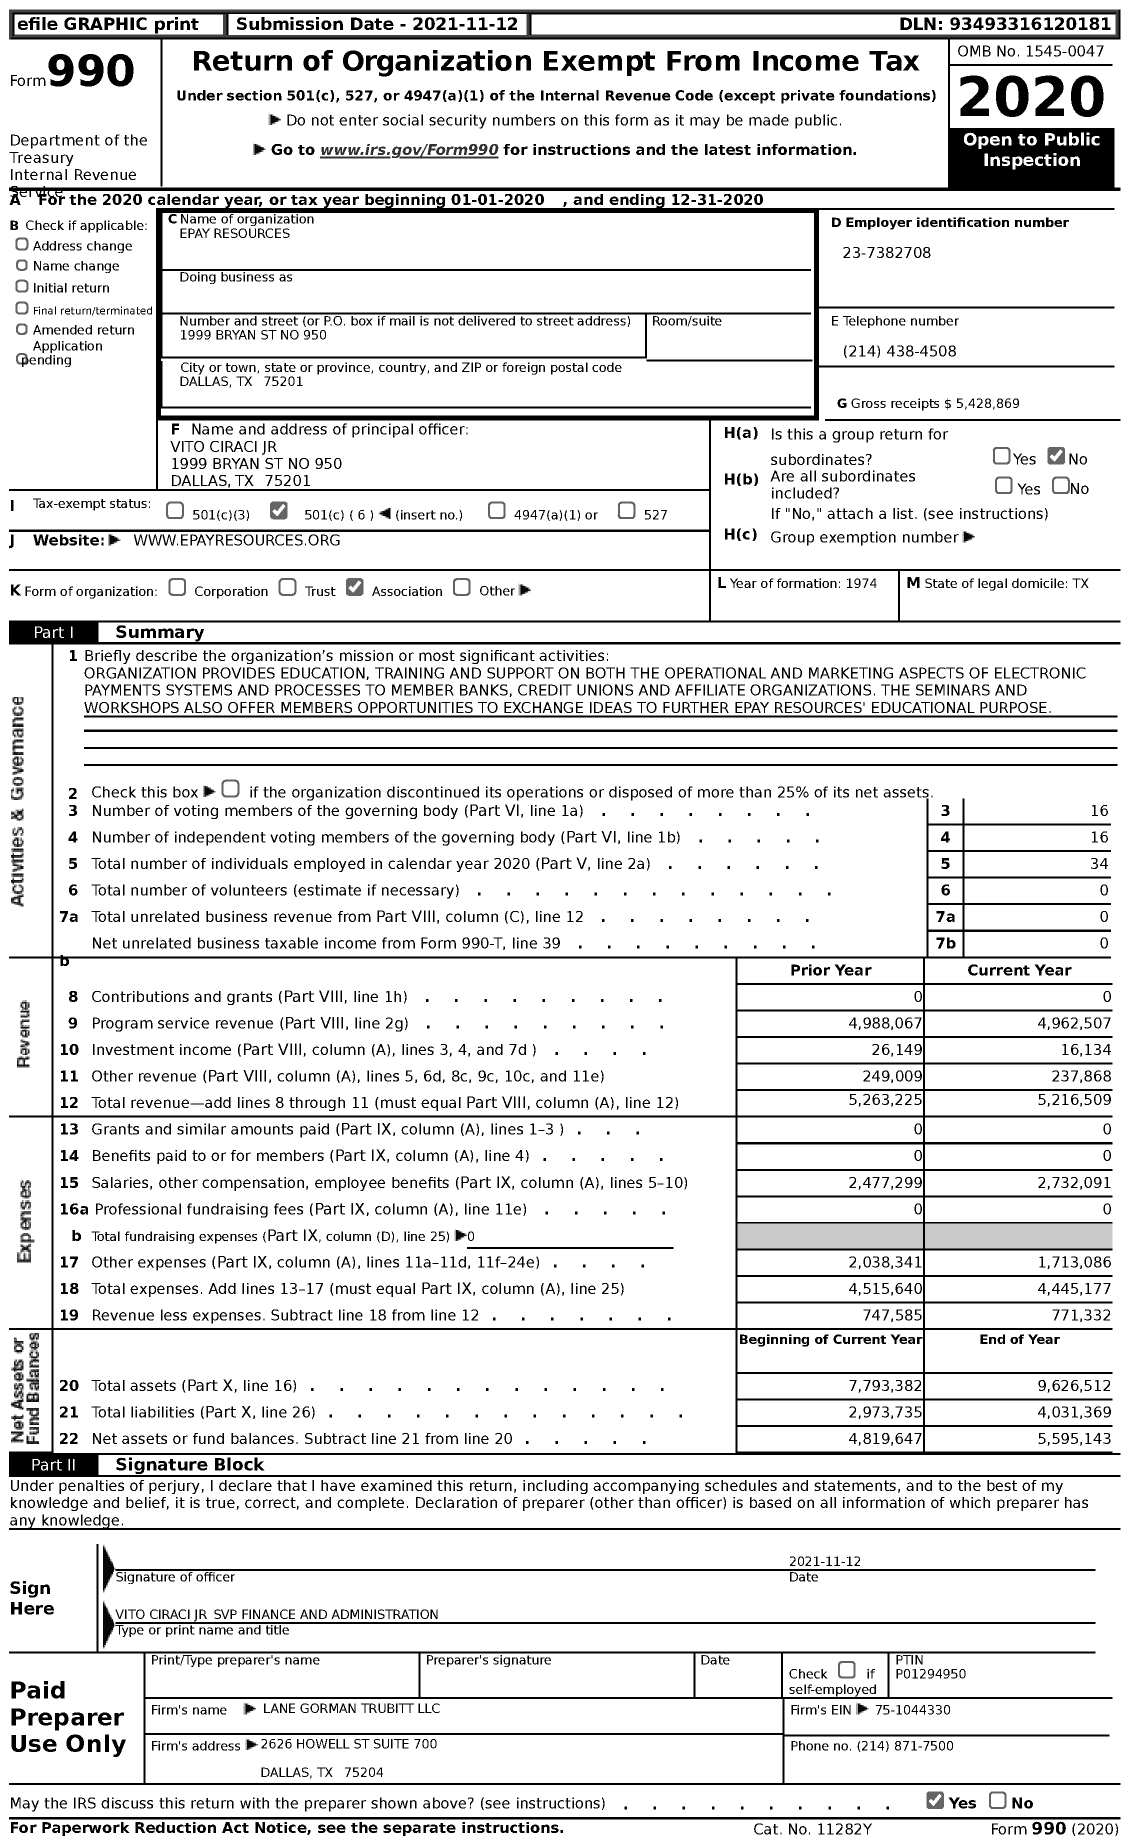 Image of first page of 2020 Form 990 for Epayresources